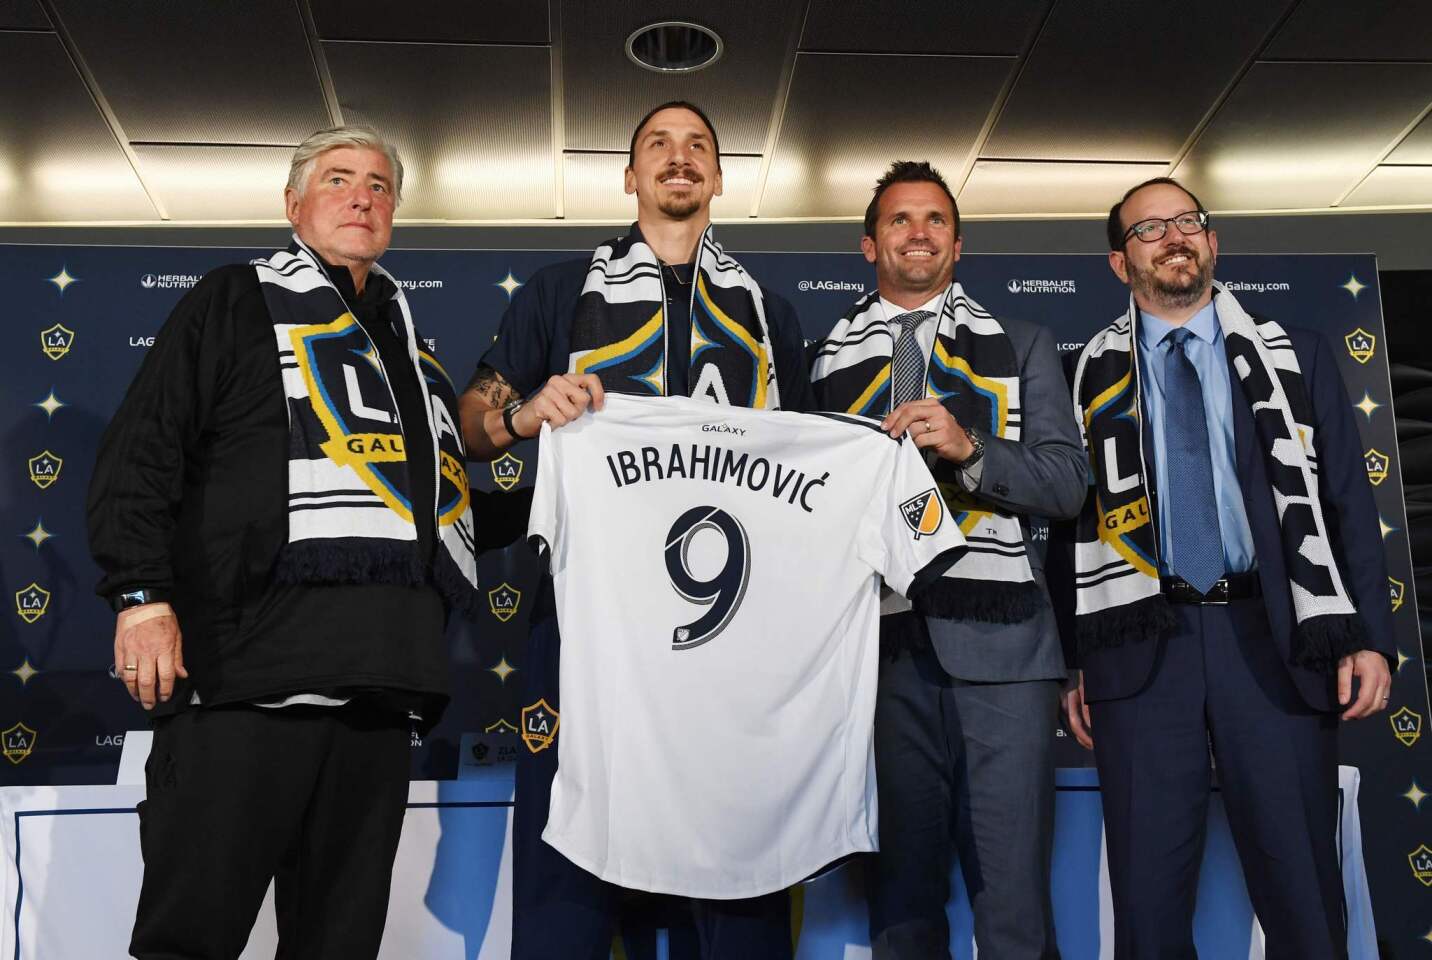 LA Galaxy footballer Zlatan Ibrahimovic (2L) holds up his new team jersey with coach Sigi Schmid (L), club president Chris Klein (2R) and AEG President Dan Beckerman (R) during a first press conference in Los Angeles, California, on March 30, 2018. The 36-year-old Swedish striker's move to MLS from Manchester United was confirmed last week, with Ibrahimovic swiftly vowing to reignite the Galaxy's fortunes after they finished bottom of the league last season. / AFP PHOTO / Mark RALSTONMARK RALSTON/AFP/Getty Images ** OUTS - ELSENT, FPG, CM - OUTS * NM, PH, VA if sourced by CT, LA or MoD **